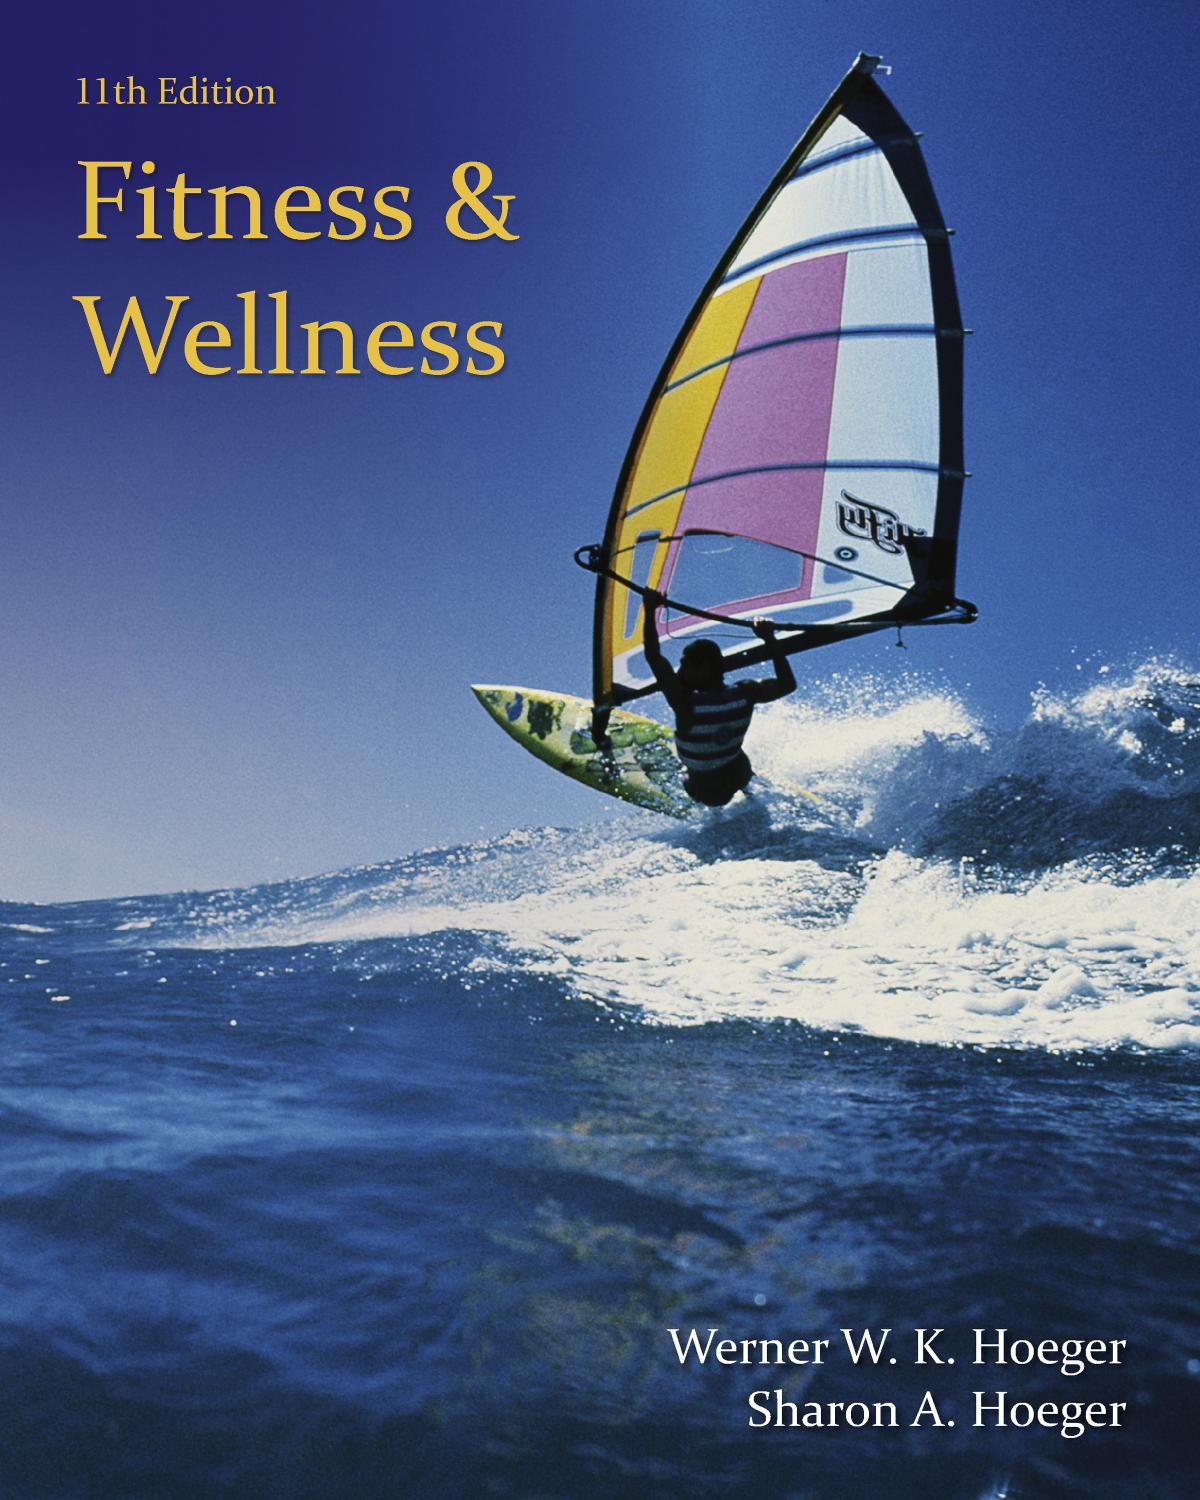 Fitness and Wellness 11th Edition by Wener W.K. Hoeger, Sharon A. Hoeger - Wei Zhi.jpg